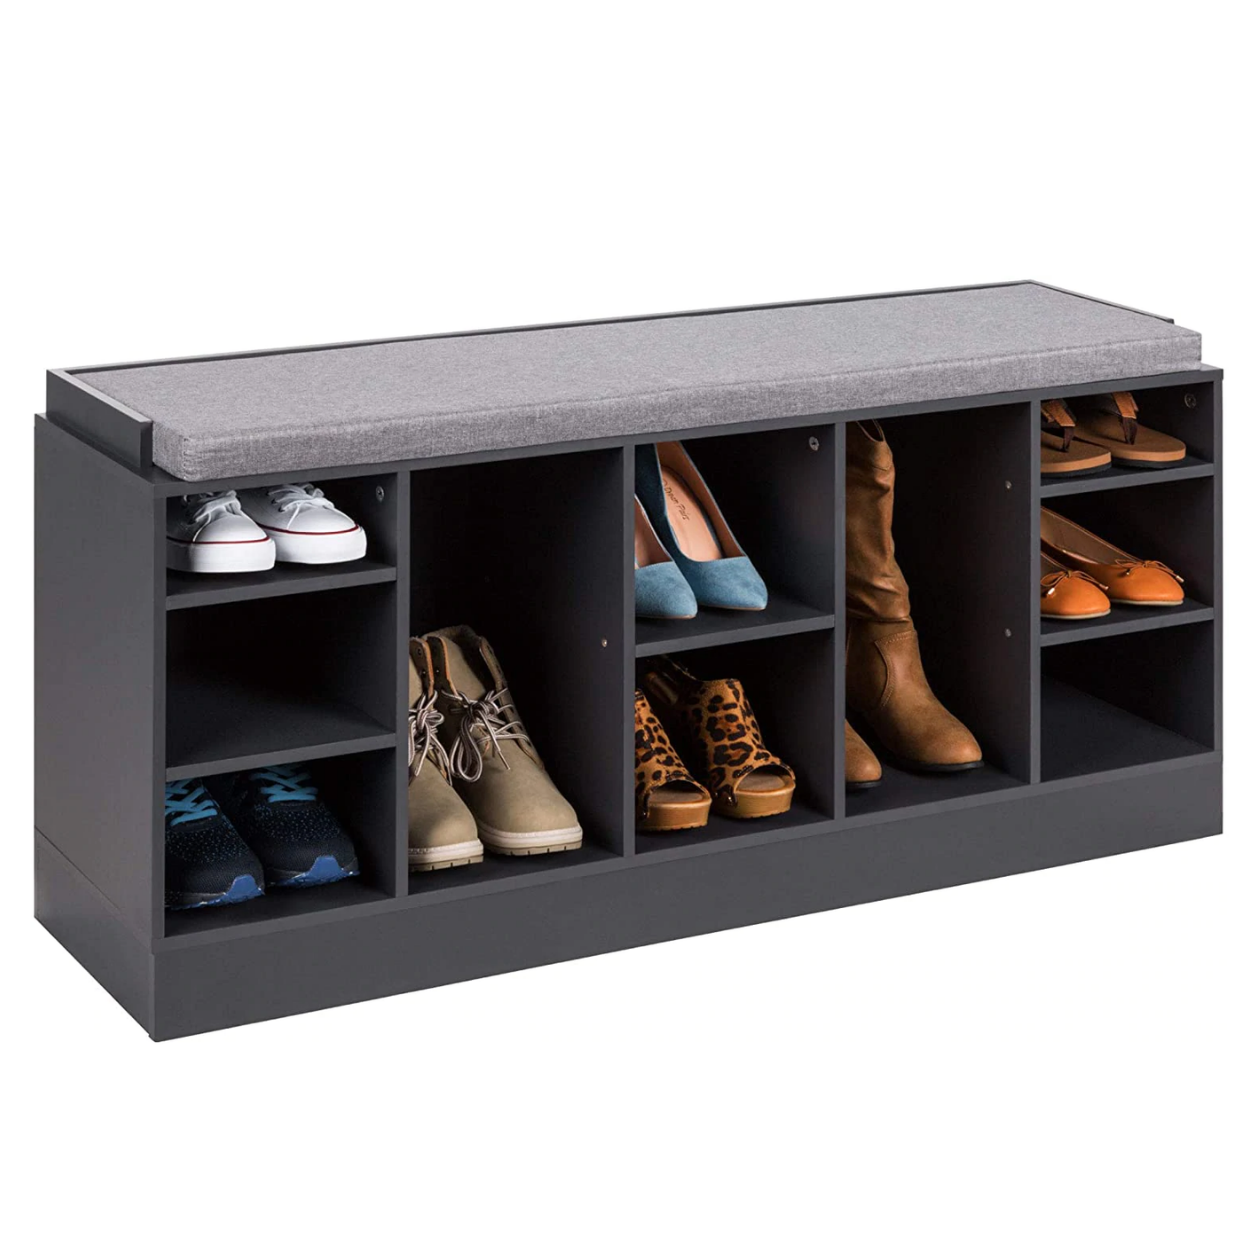 Benches Storage Shoe Rack Bench for Entryway, Living Room  10 Cubbies - Gray